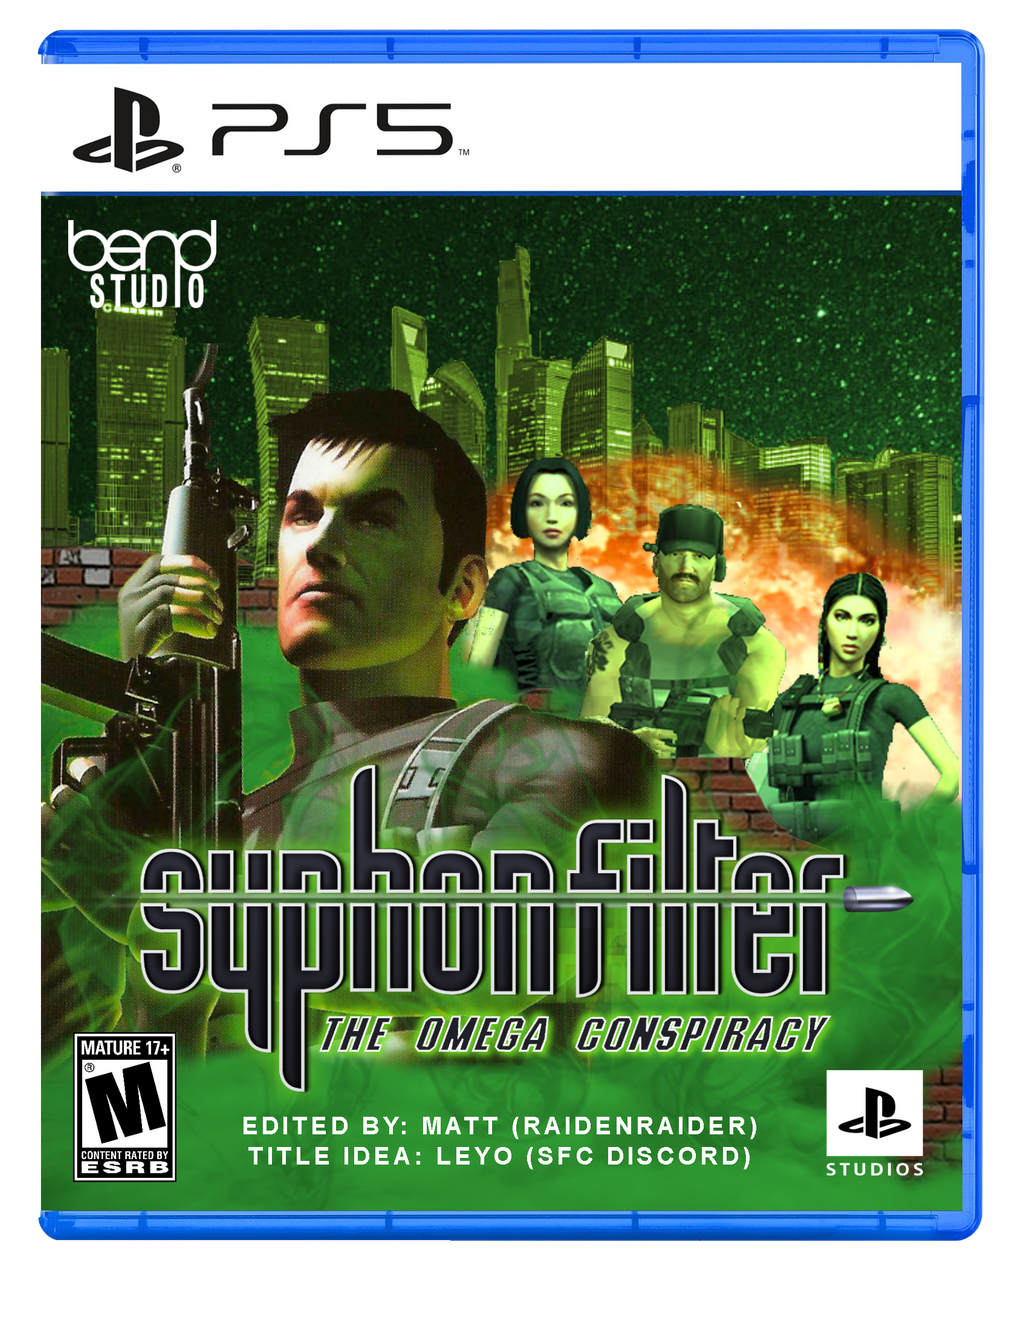 Syphon Filter The Omega Strain - PC Cover #1 by RaidenRaider on DeviantArt